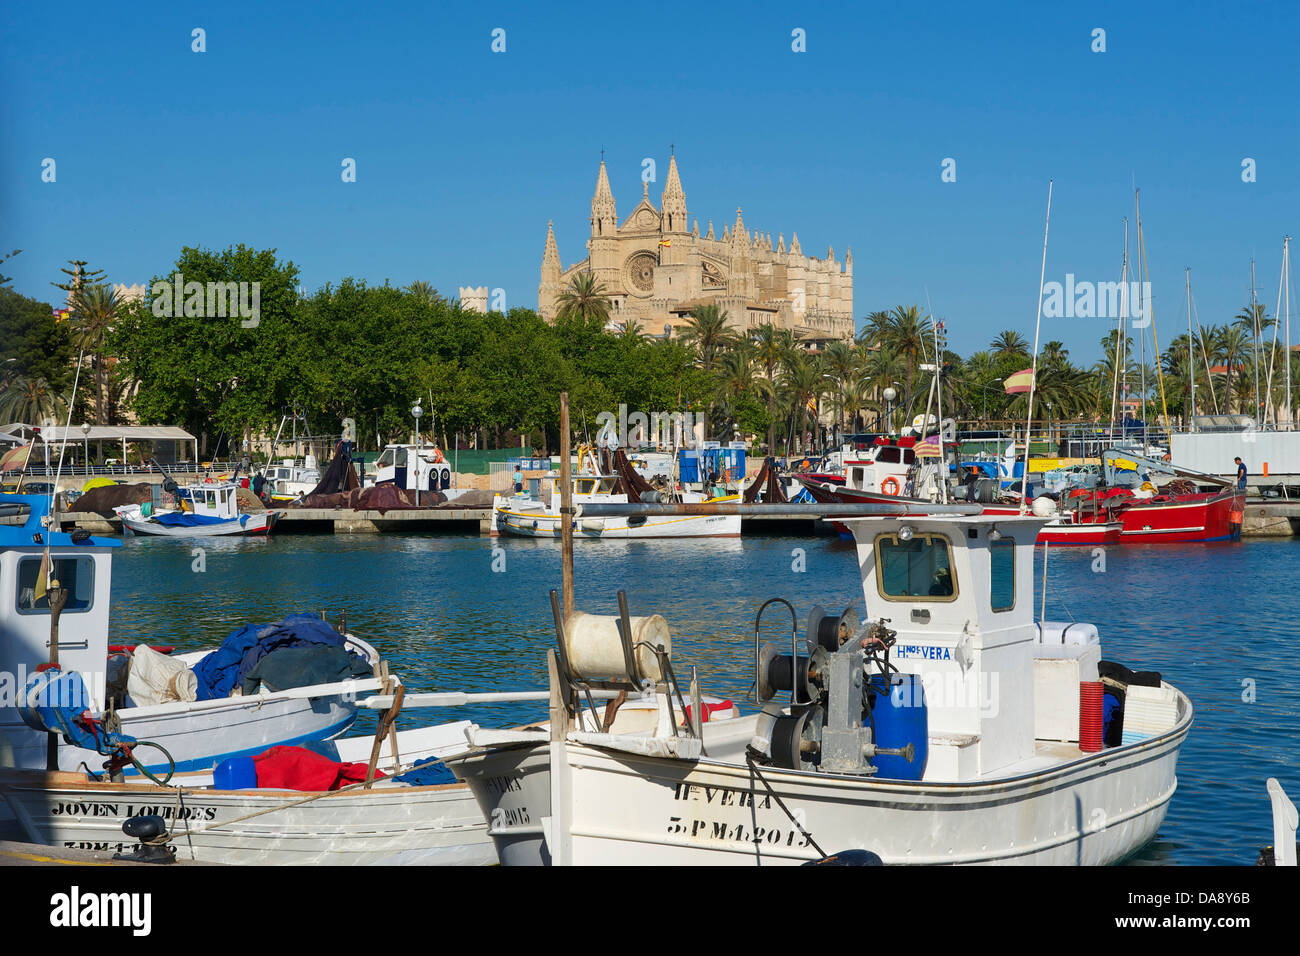 Balearic Islands, Majorca, Mallorca, Spain, Europe, outside, cathedral, cathedrals, cathedral, dome, church, churches, religion, Stock Photo